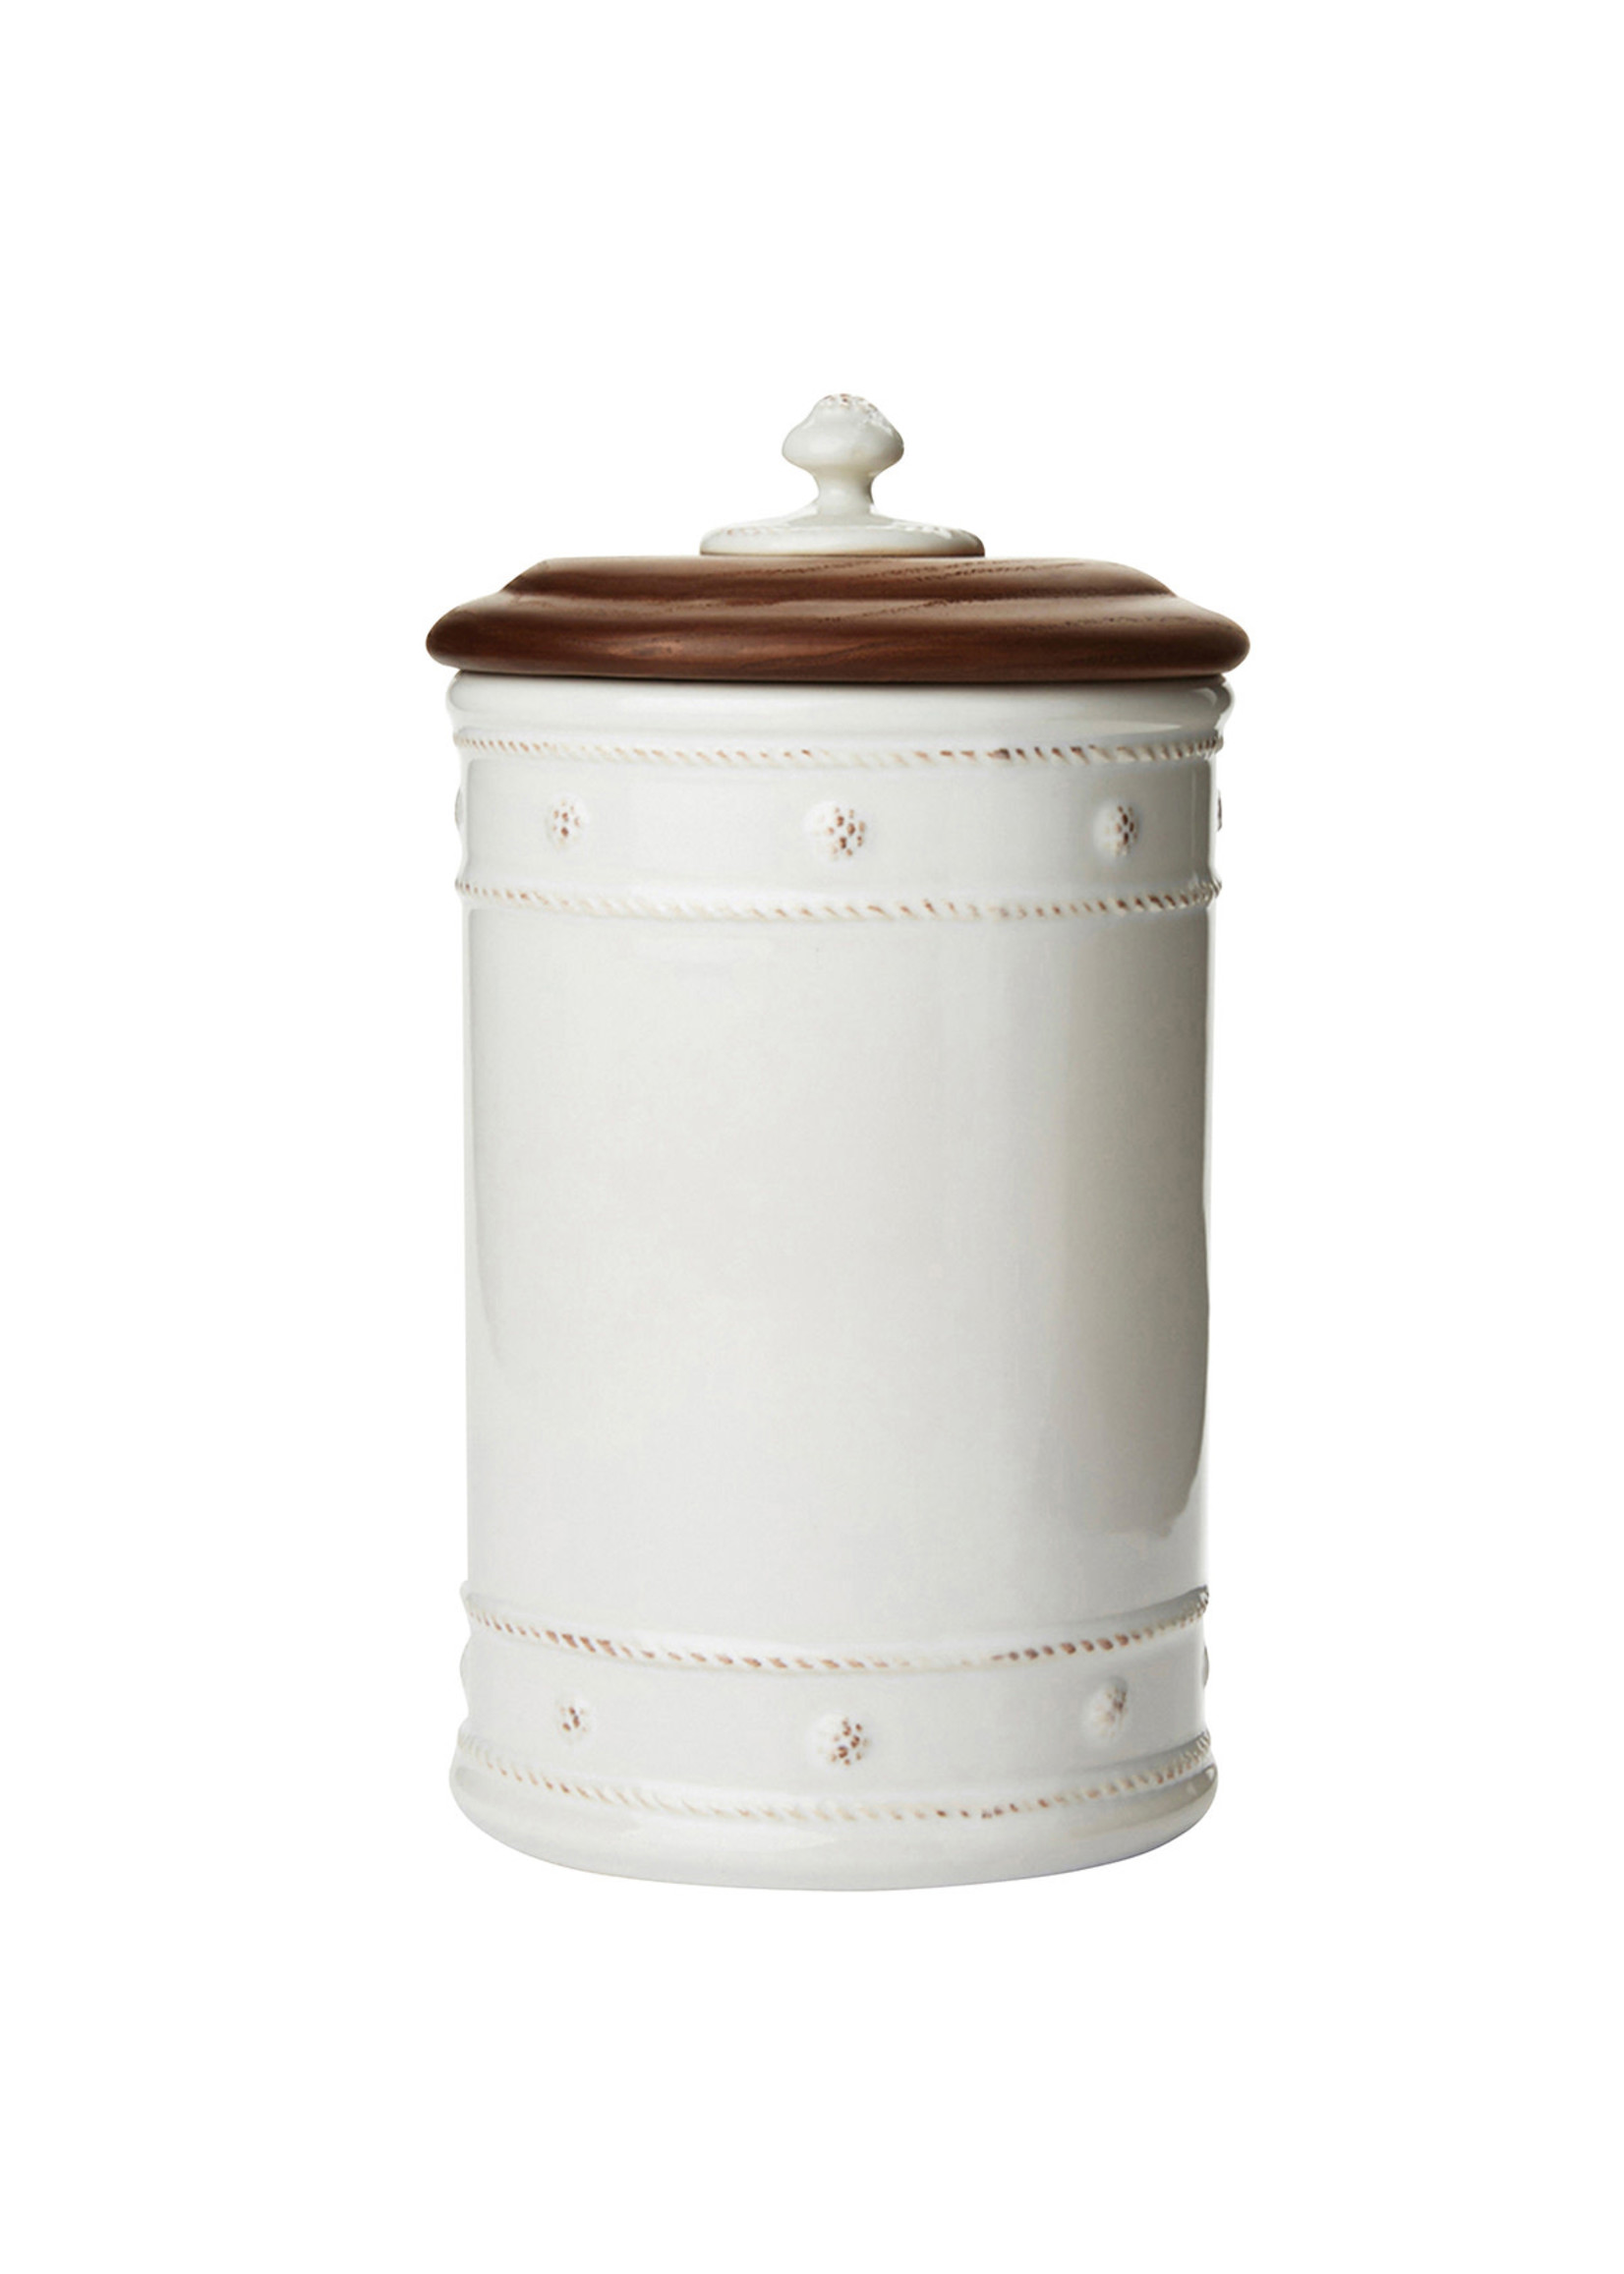 Juliska Berry & Thread Whitewash 10" Canister with Wooden Lid